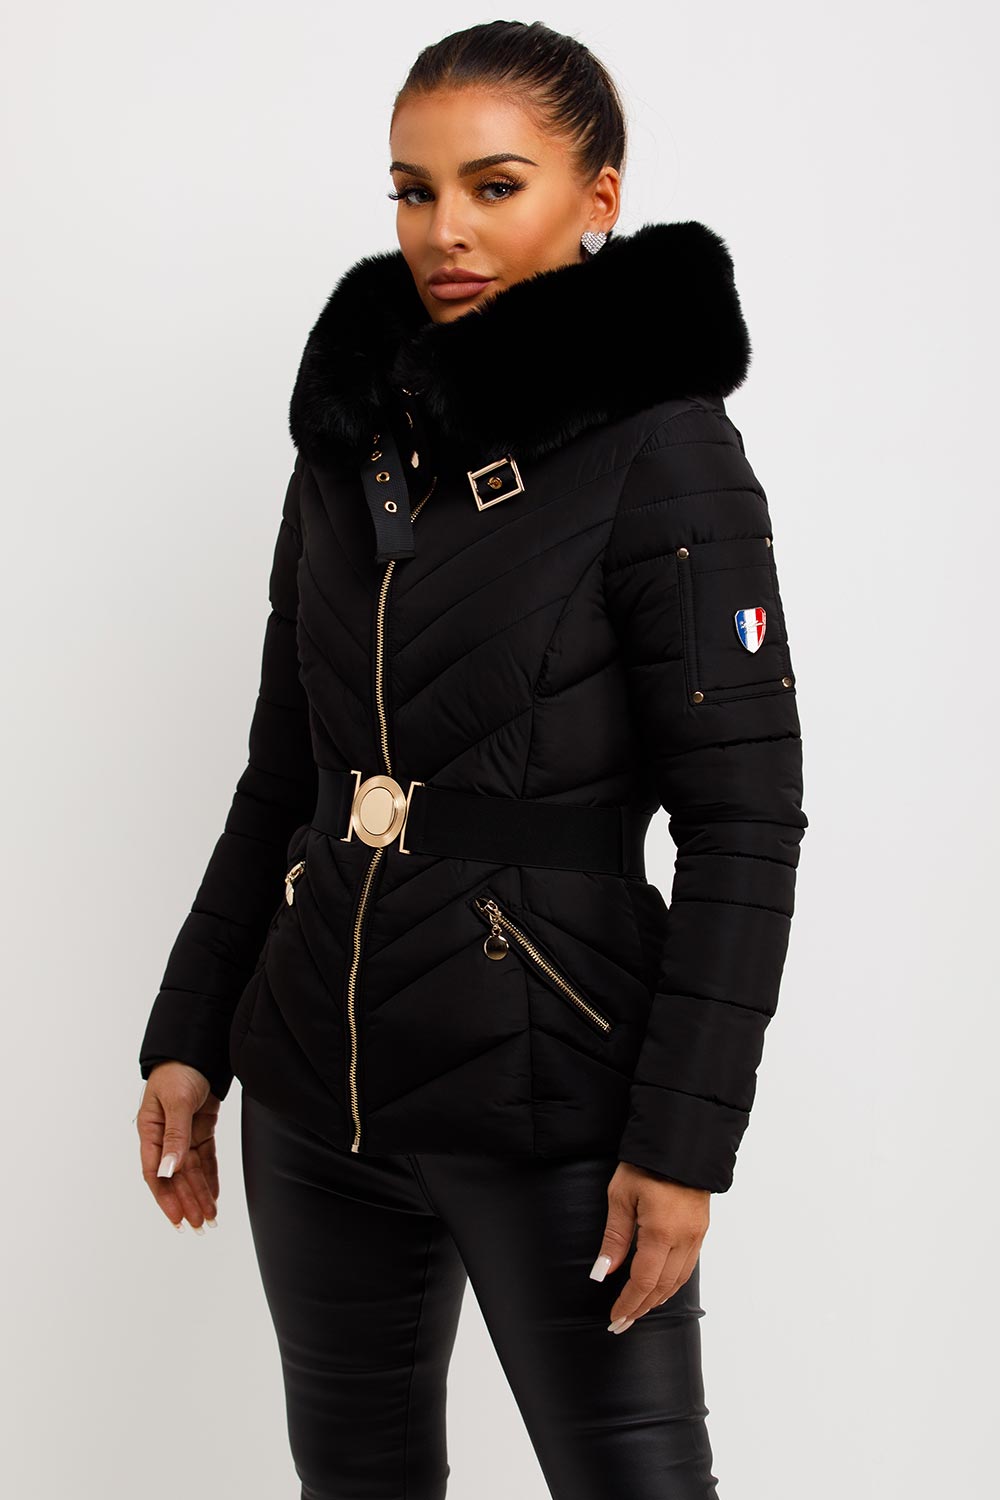 womens black puffer jacket with fur hood and belt